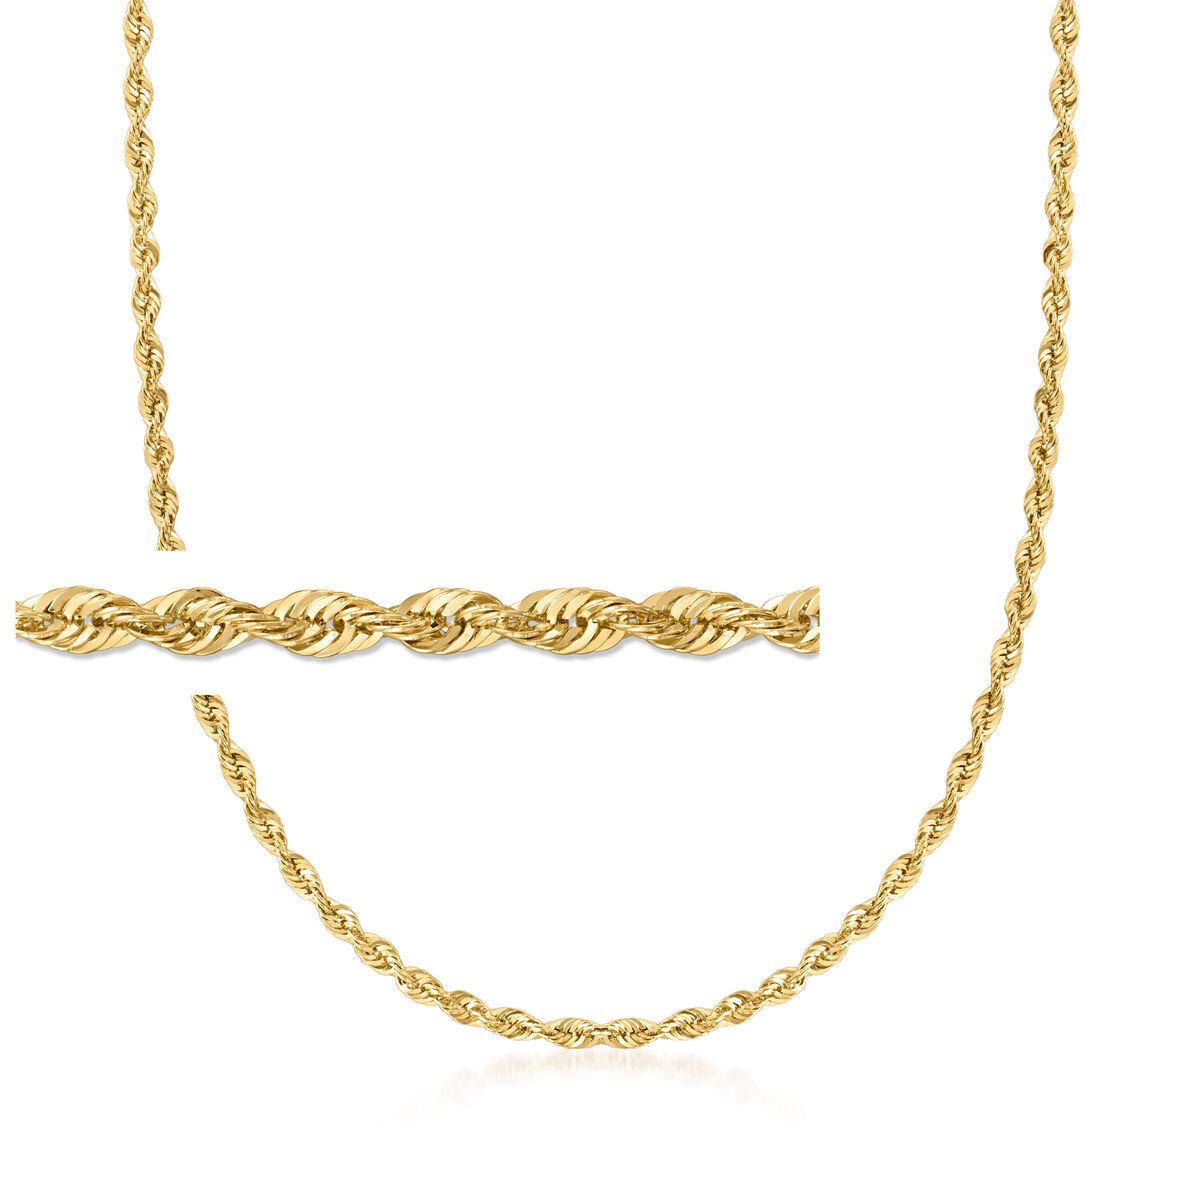 2.6mm 14kt Yellow Gold Rope-Chain Necklace. 16" | Ross-Simons